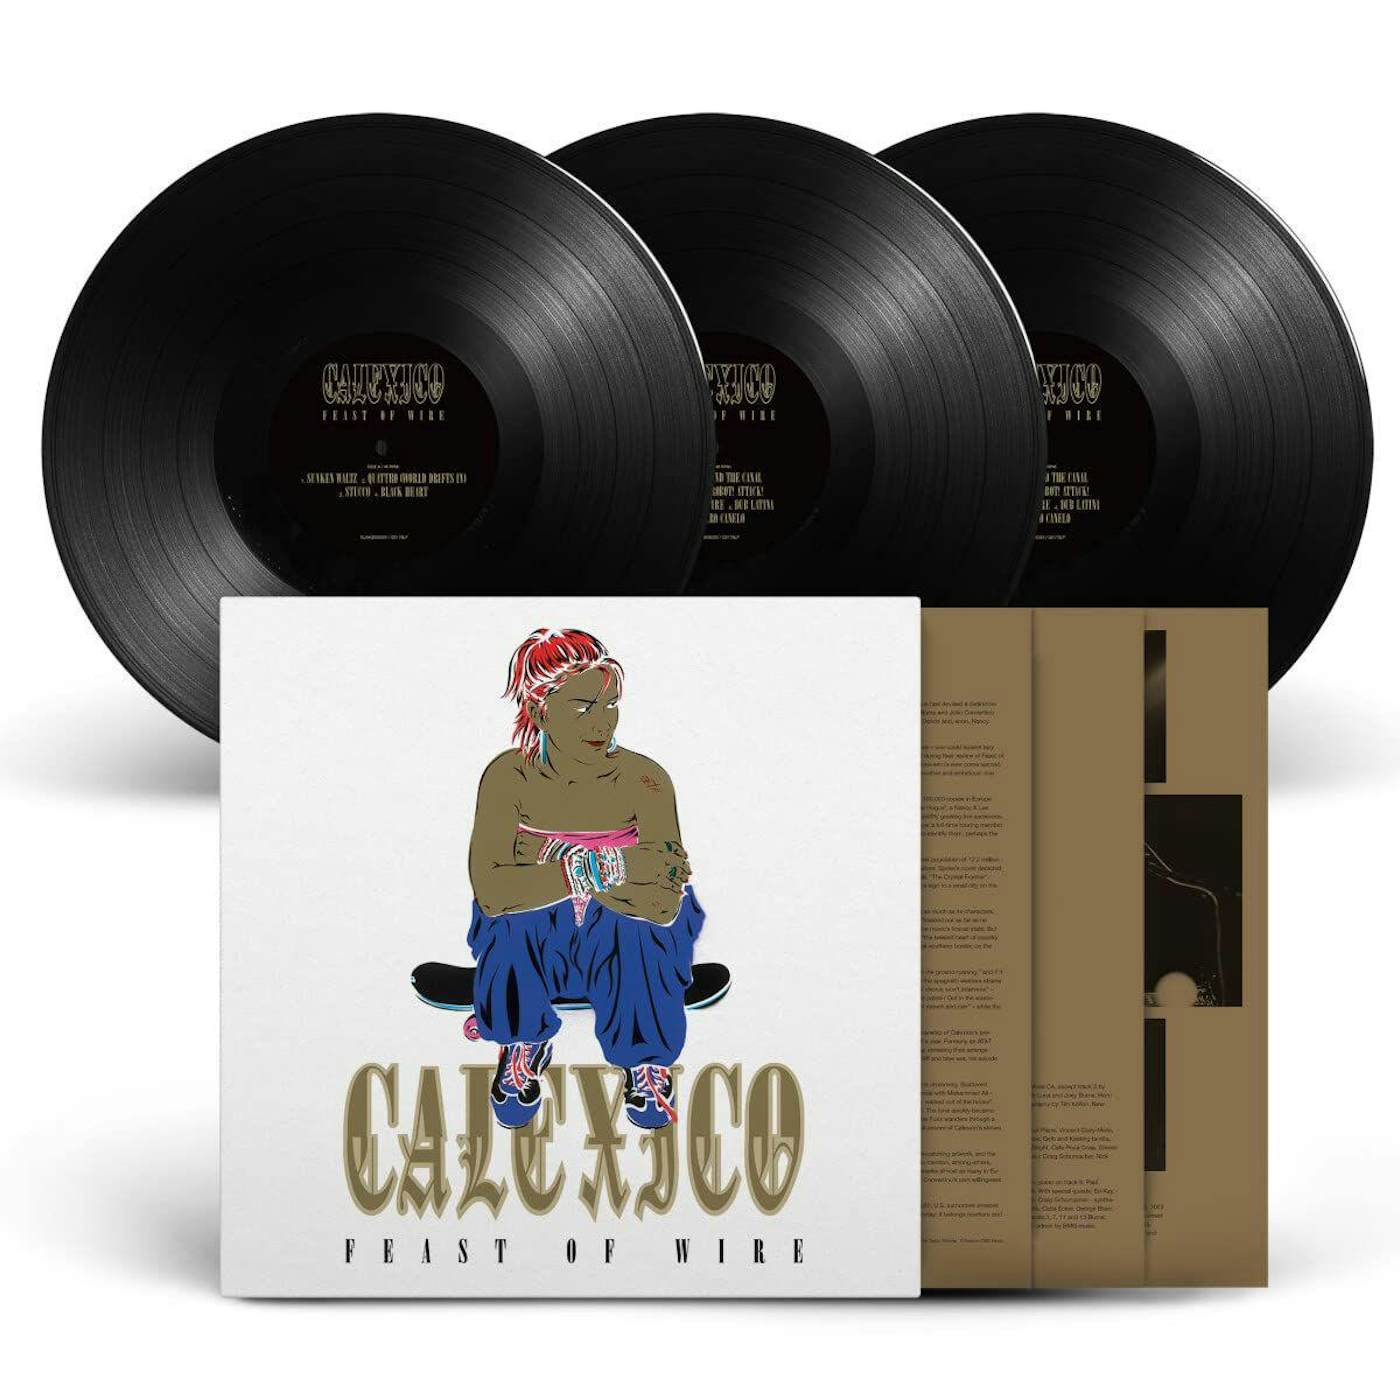 Calexico Feast Of Wire - 20th Anniversary Deluxe Edition Vinyl Record